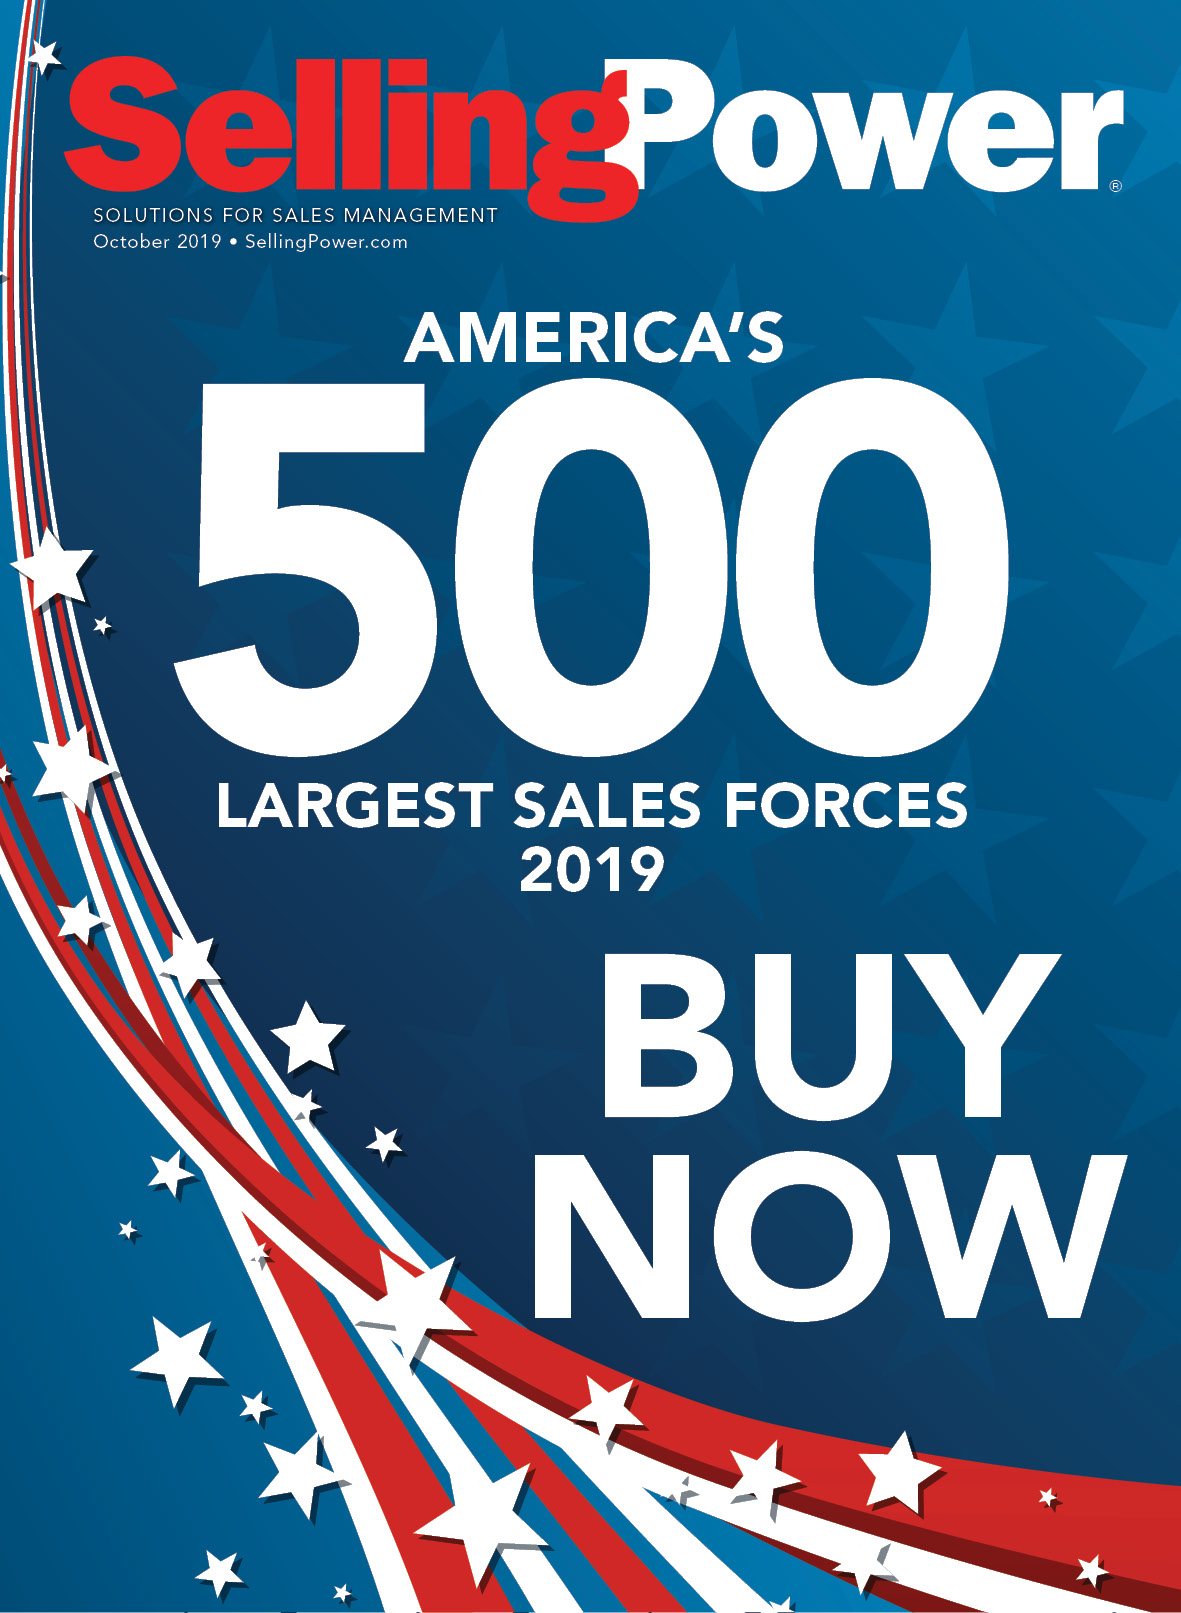 Cover image of the Selling Power 2019 Largest Sales Forces in America annual ranking